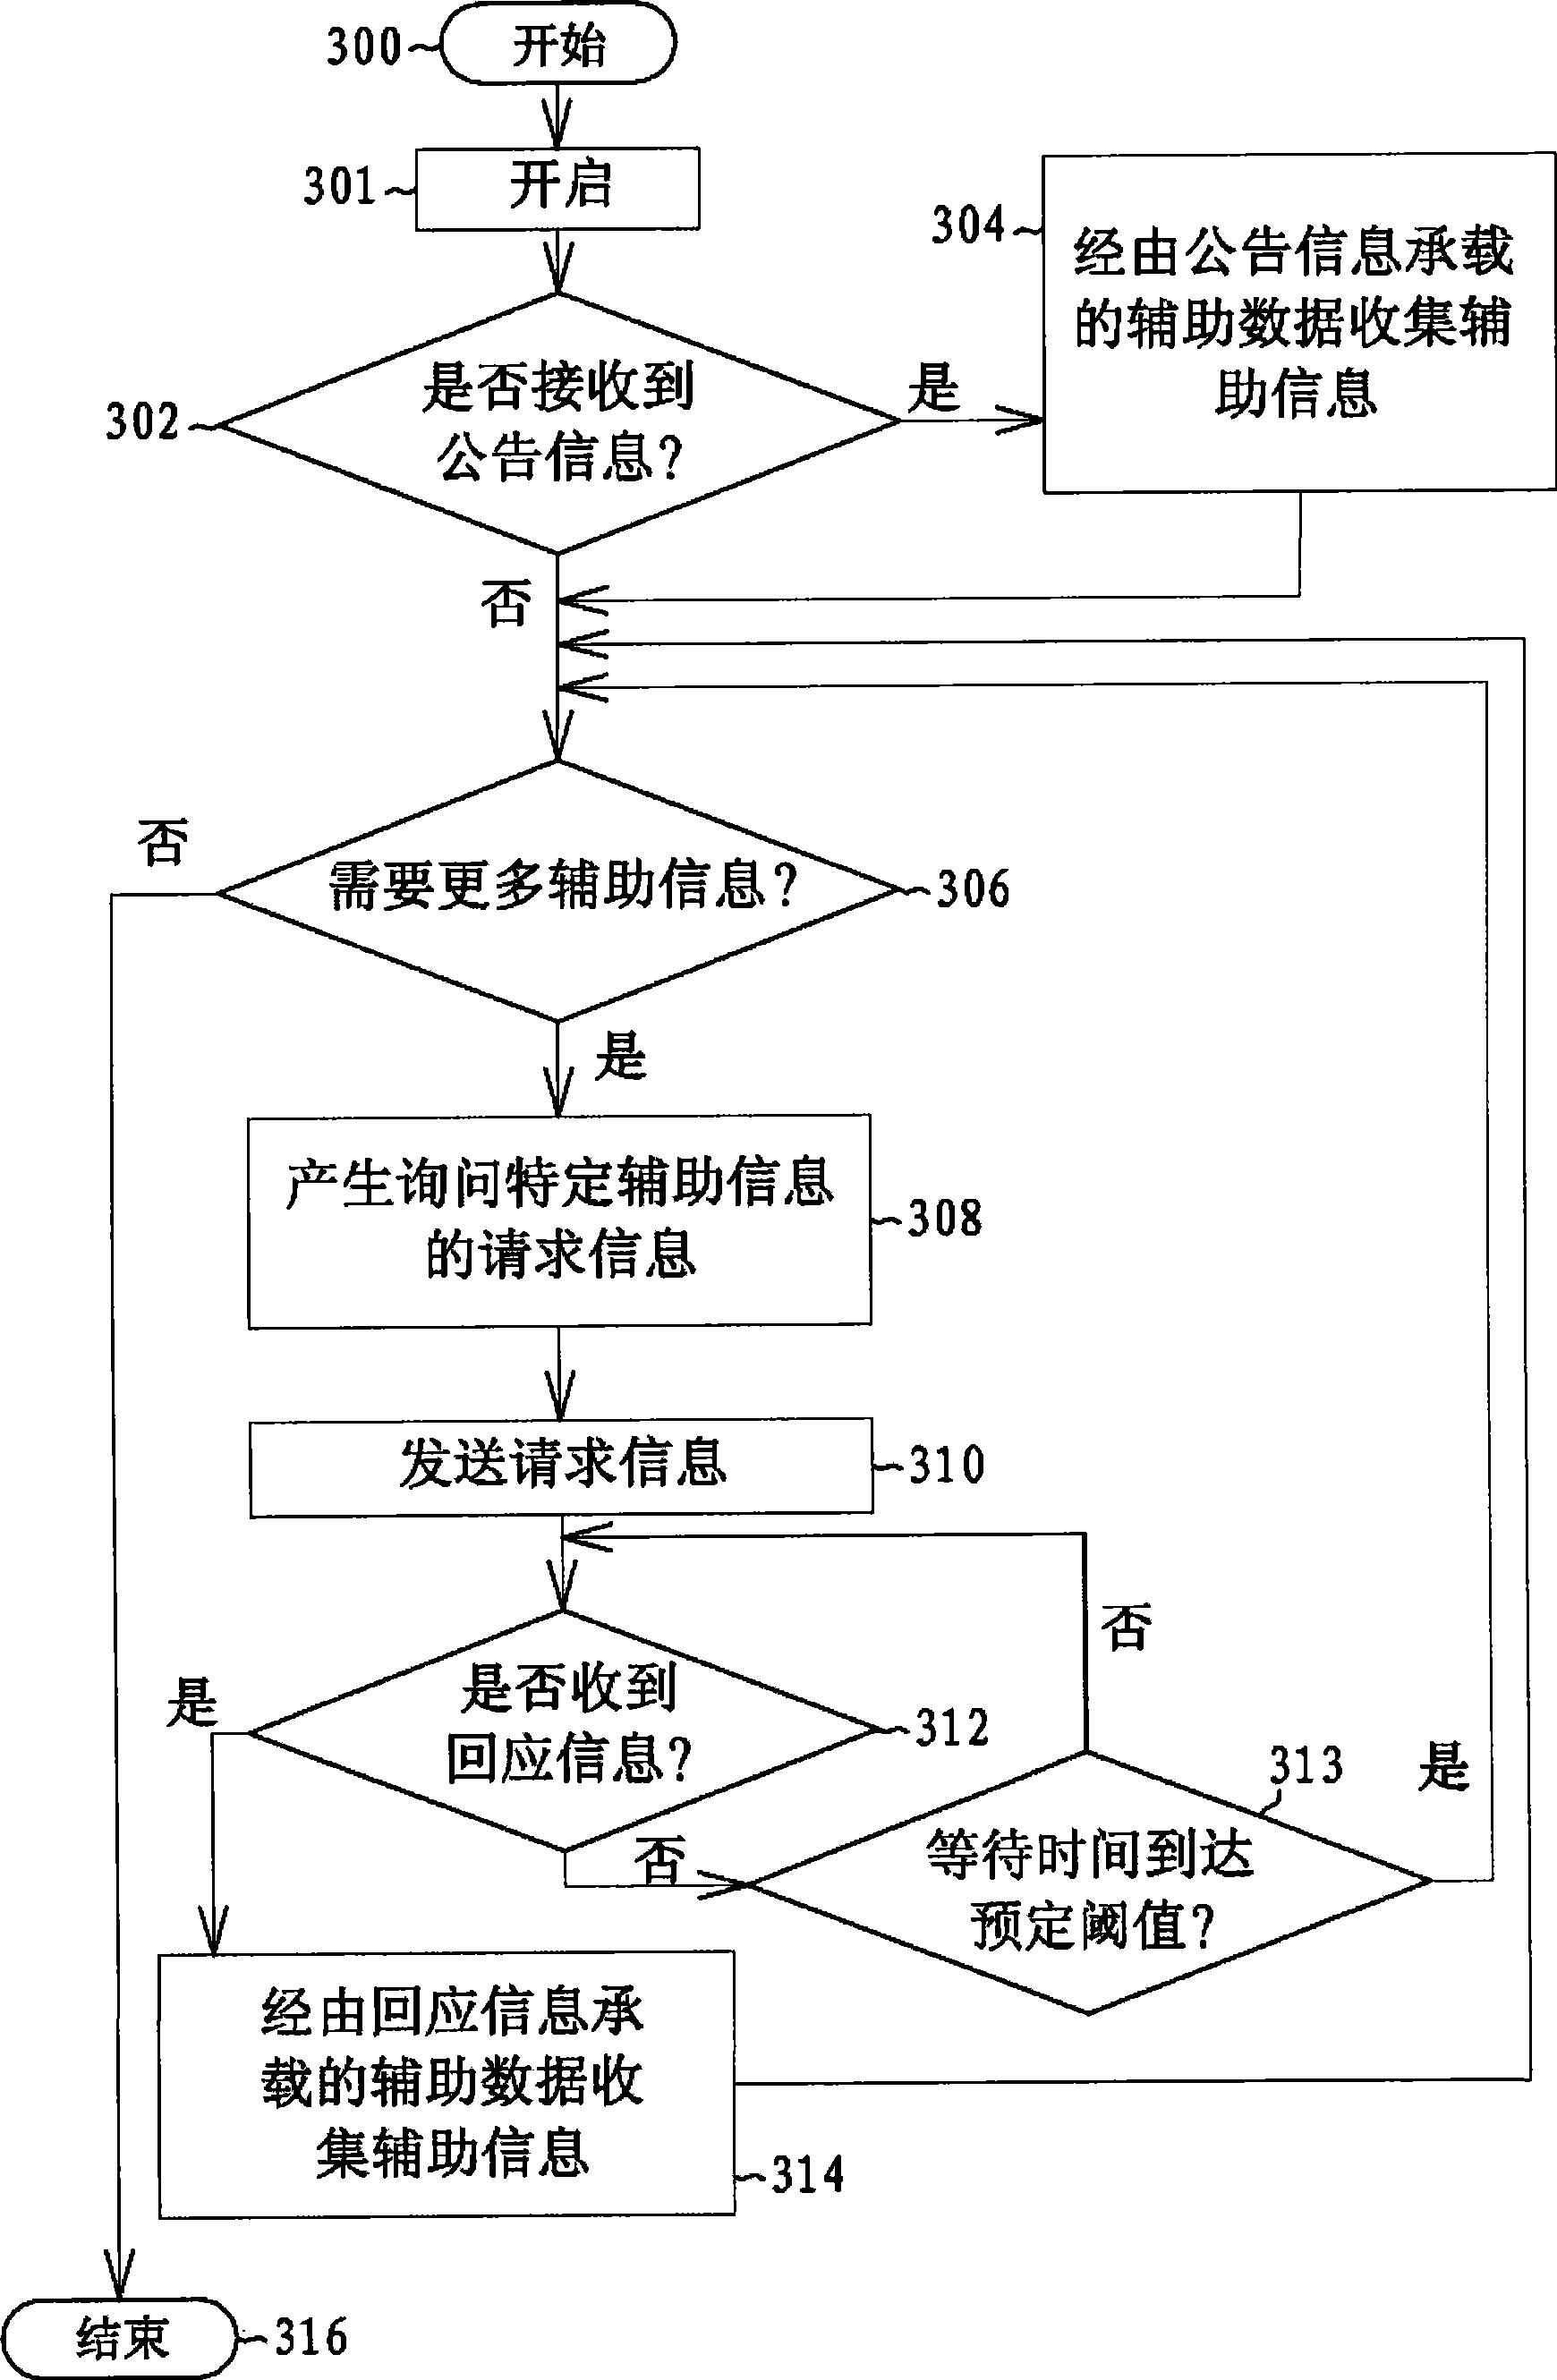 Gnss receiver system and related method thereof